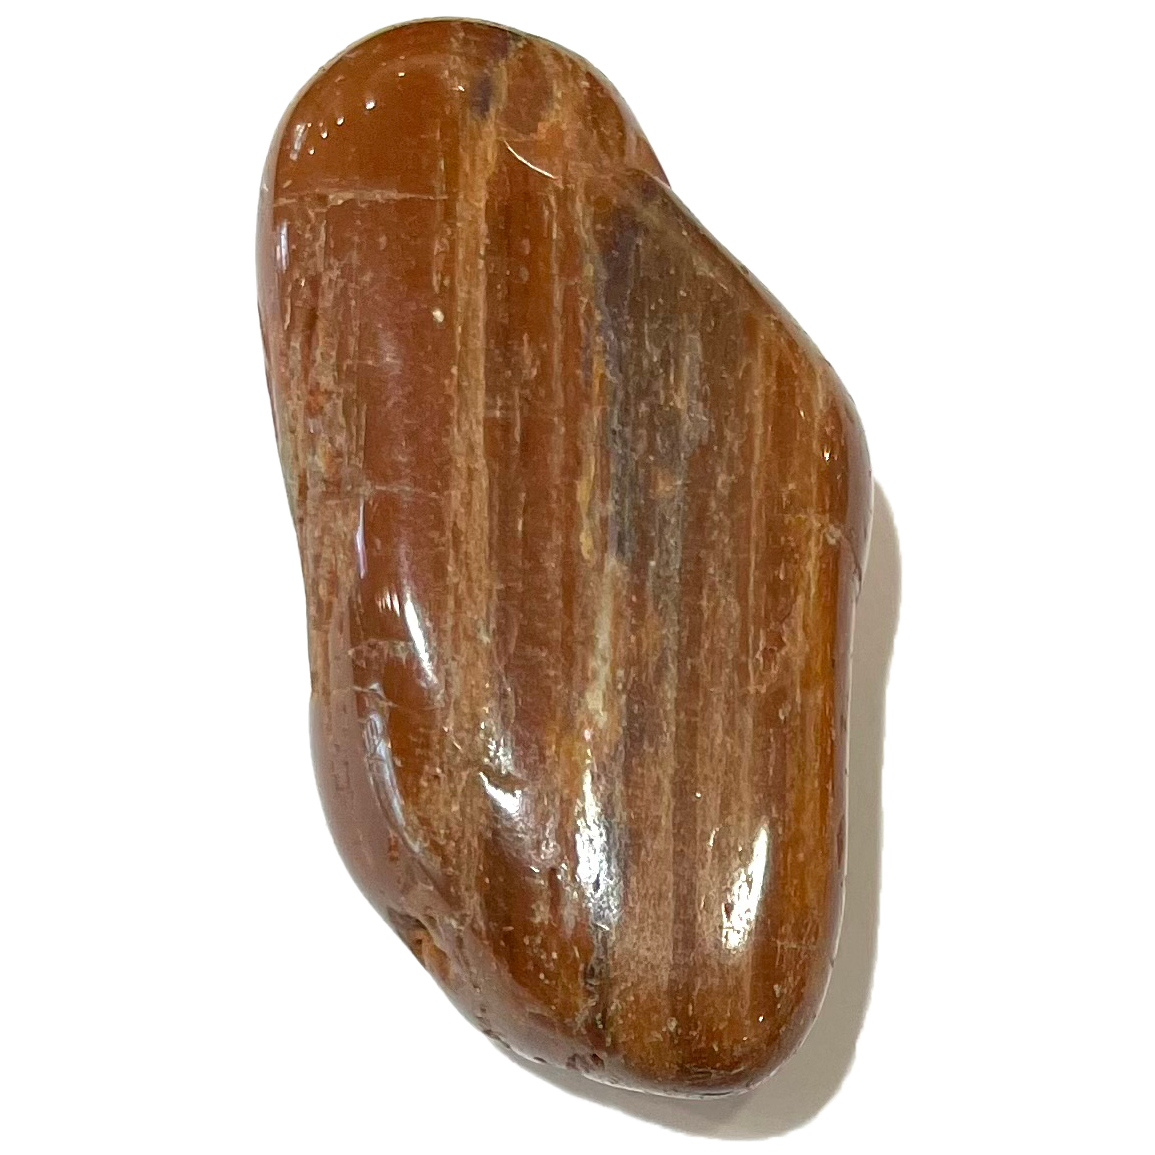 A tumbled piece of brown petrified wood.  Black striations are seen.